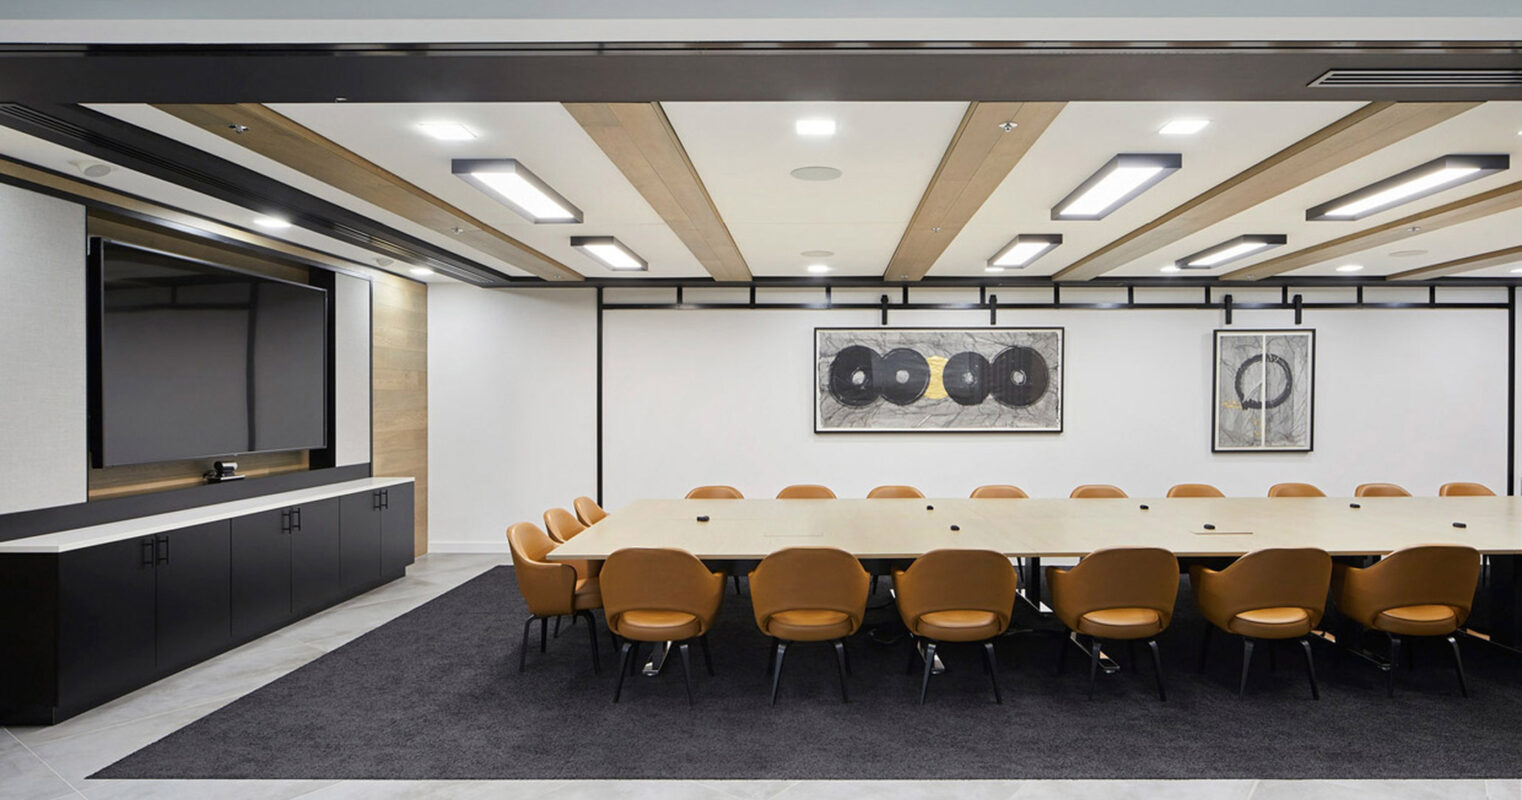 Modern conference room featuring a long wooden table surrounded by tan chairs, flanked by cabinetry and a large screen. Overhead, geometric light fixtures complement the linear wood-paneled ceiling, adding warmth to the neutral color palette. Two abstract monochrome artworks adorn the rear wall.